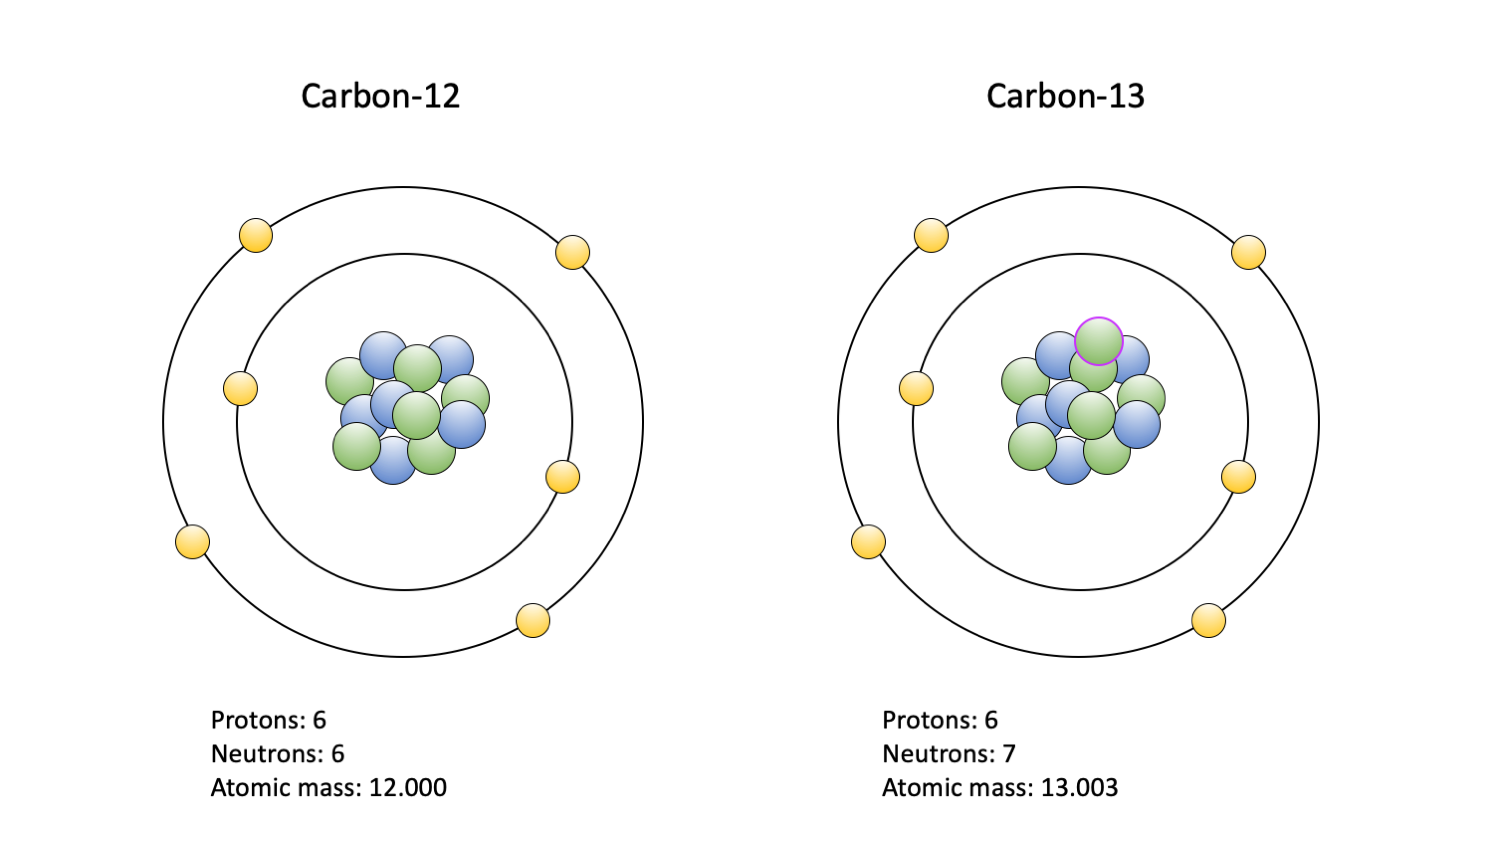 Two diagrams of carbon isotopes. The left diagram shows carbon-12. It consists of a central nucleus with 6 protons and 6 neutrons surrounded by to circular orbits with electrons. The inner orbit has two electrons, the outer orbit has four electrons. The right diagram shows carbon-13. It looks the same as carbon-12 except that it has one more neutron in its nucleus.